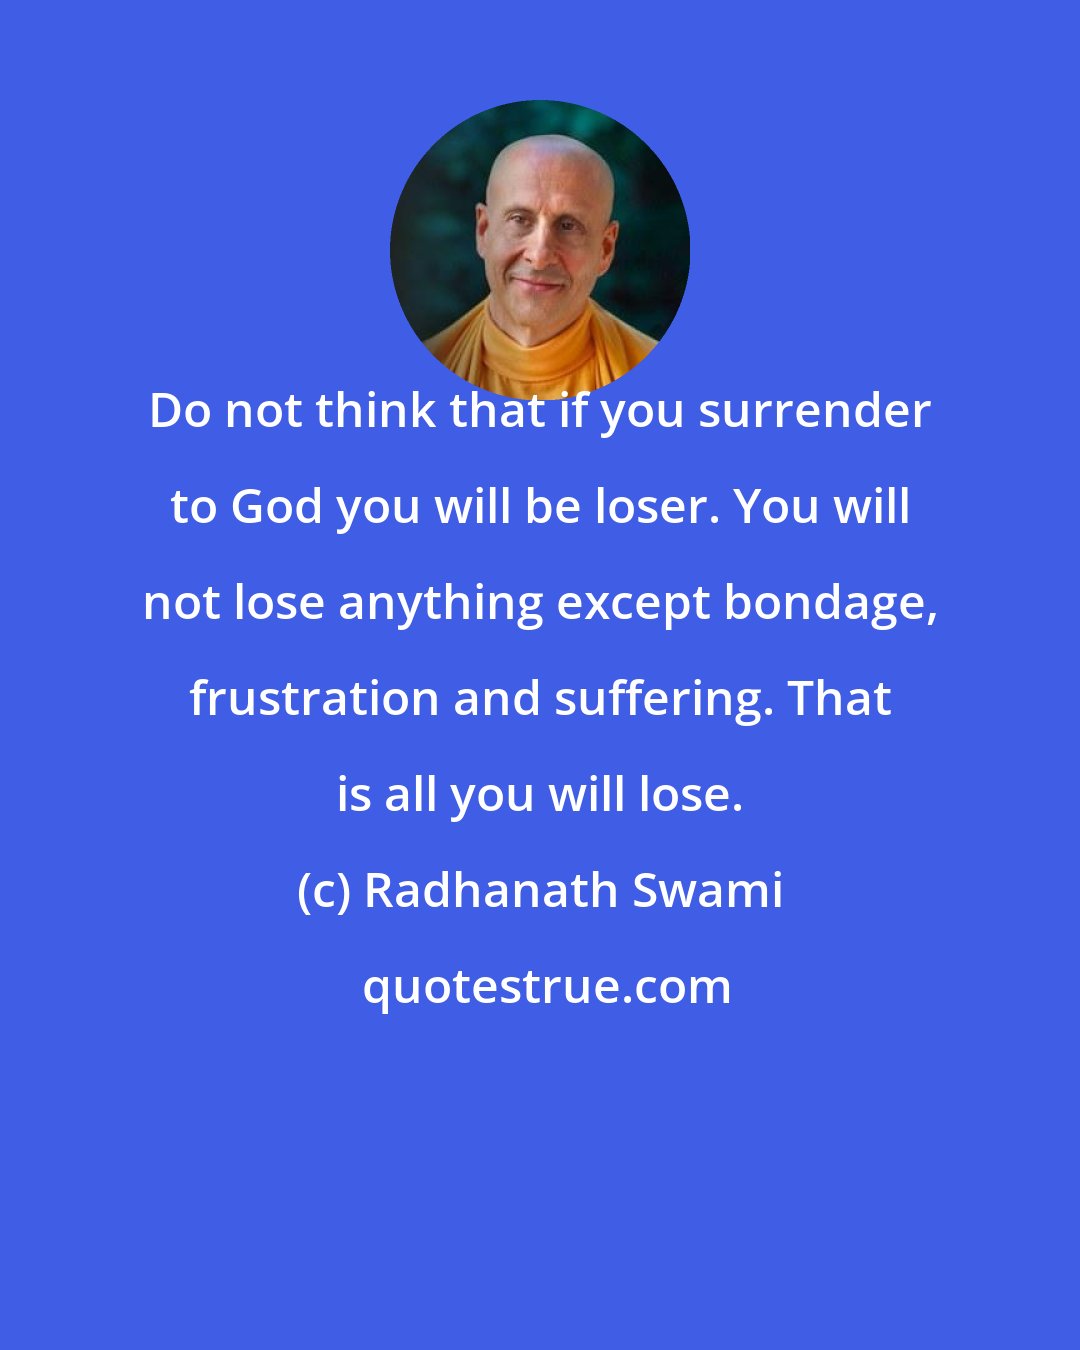 Radhanath Swami: Do not think that if you surrender to God you will be loser. You will not lose anything except bondage, frustration and suffering. That is all you will lose.